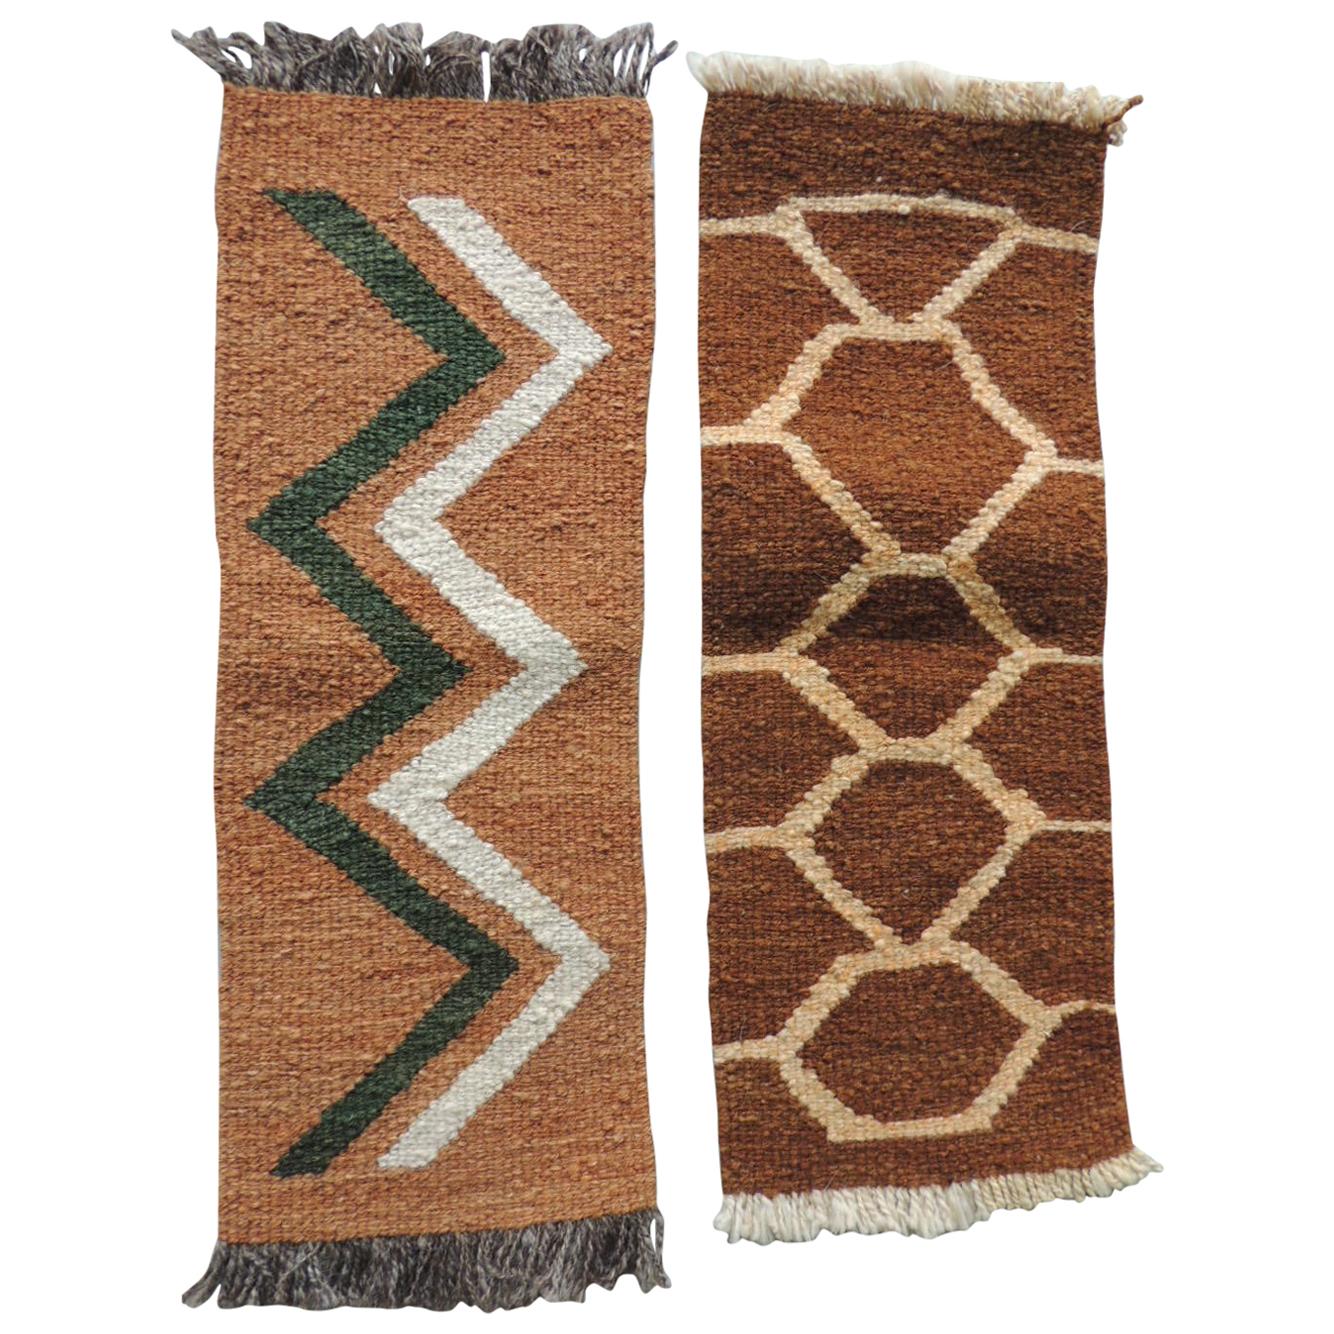 Pair of Petite Vintage Camel and Brown Woven Rug Samples For Sale